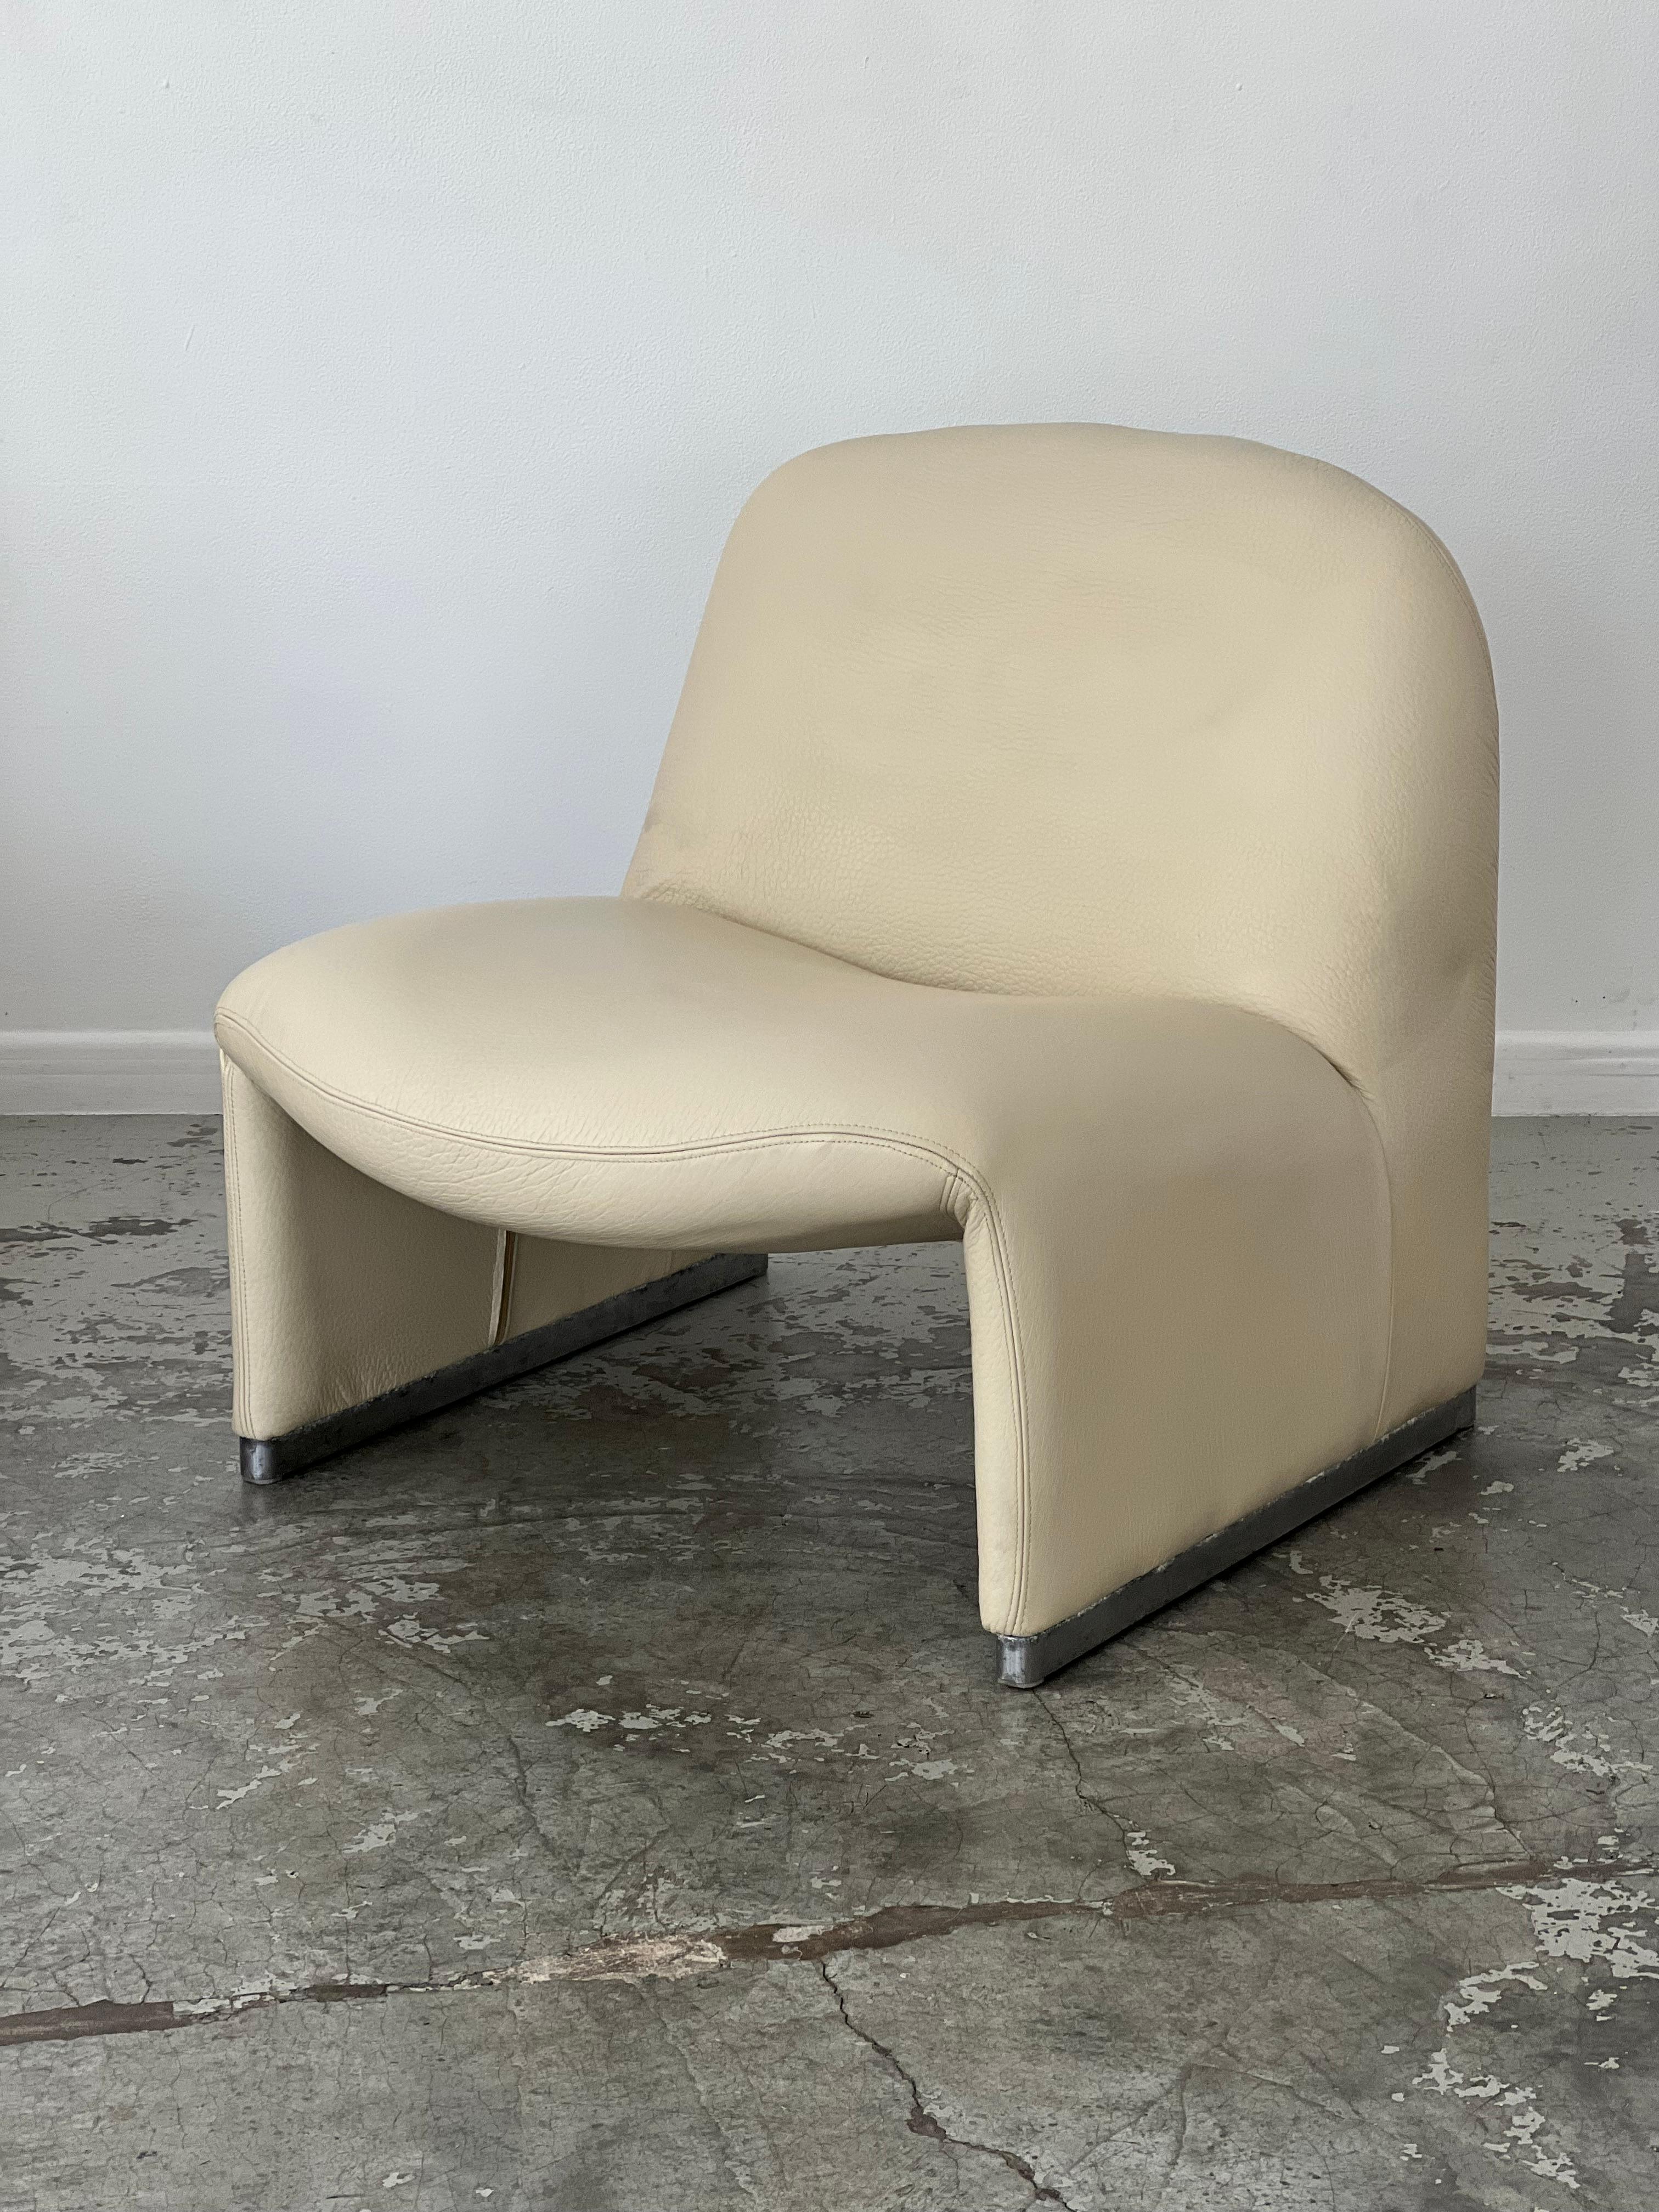 This alky armchair was designed by giancarlo piretti for the famous castelli publishing house. This Italian designer studied at the instituto statale d'arte before starting his career at anonima castelli. For more than two decades, he has created a